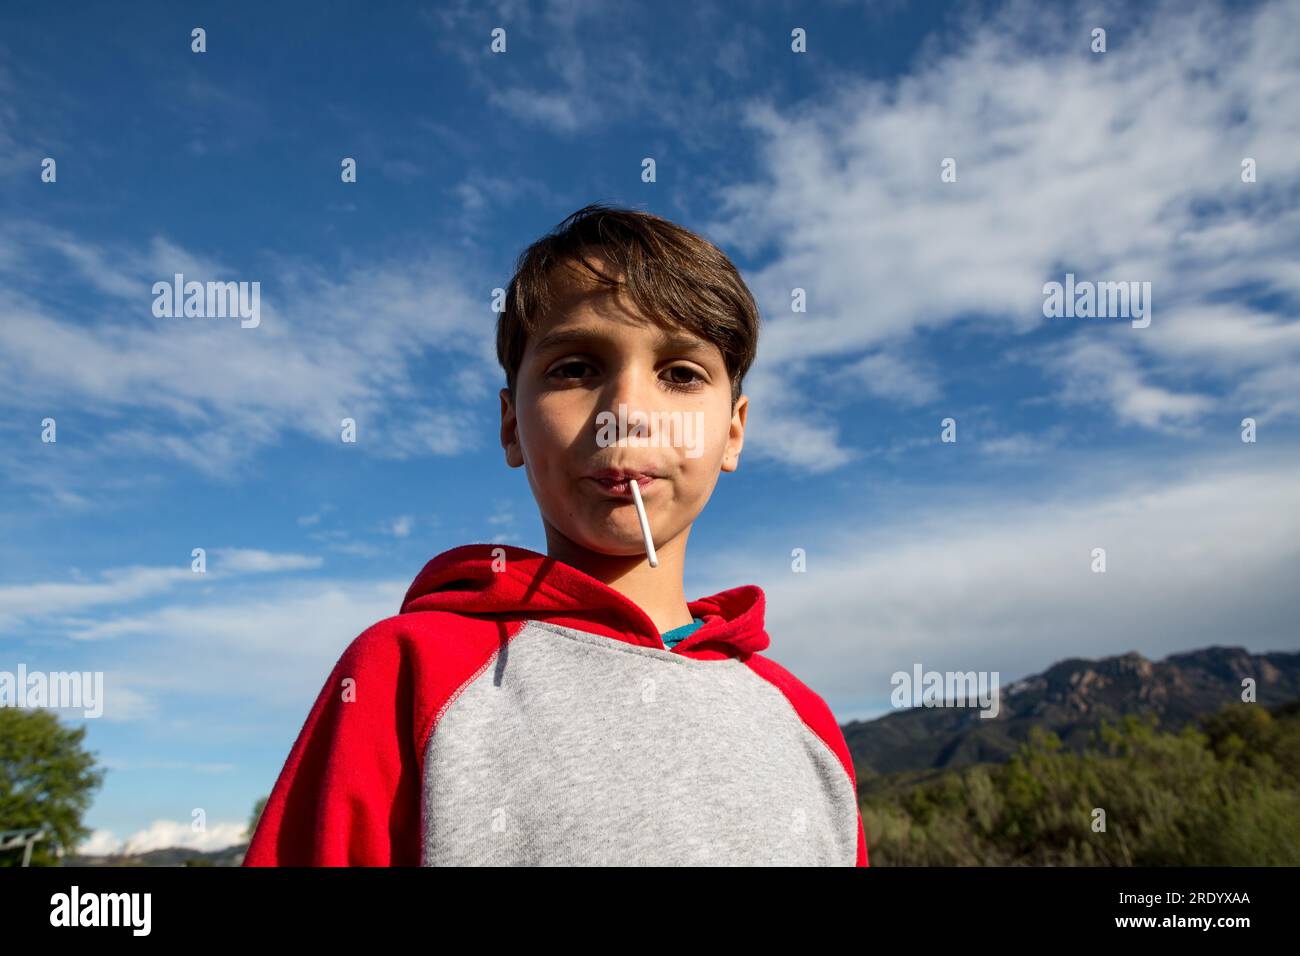 Boy outside looks down at camera with a lollipop in his mouth Stock Photo